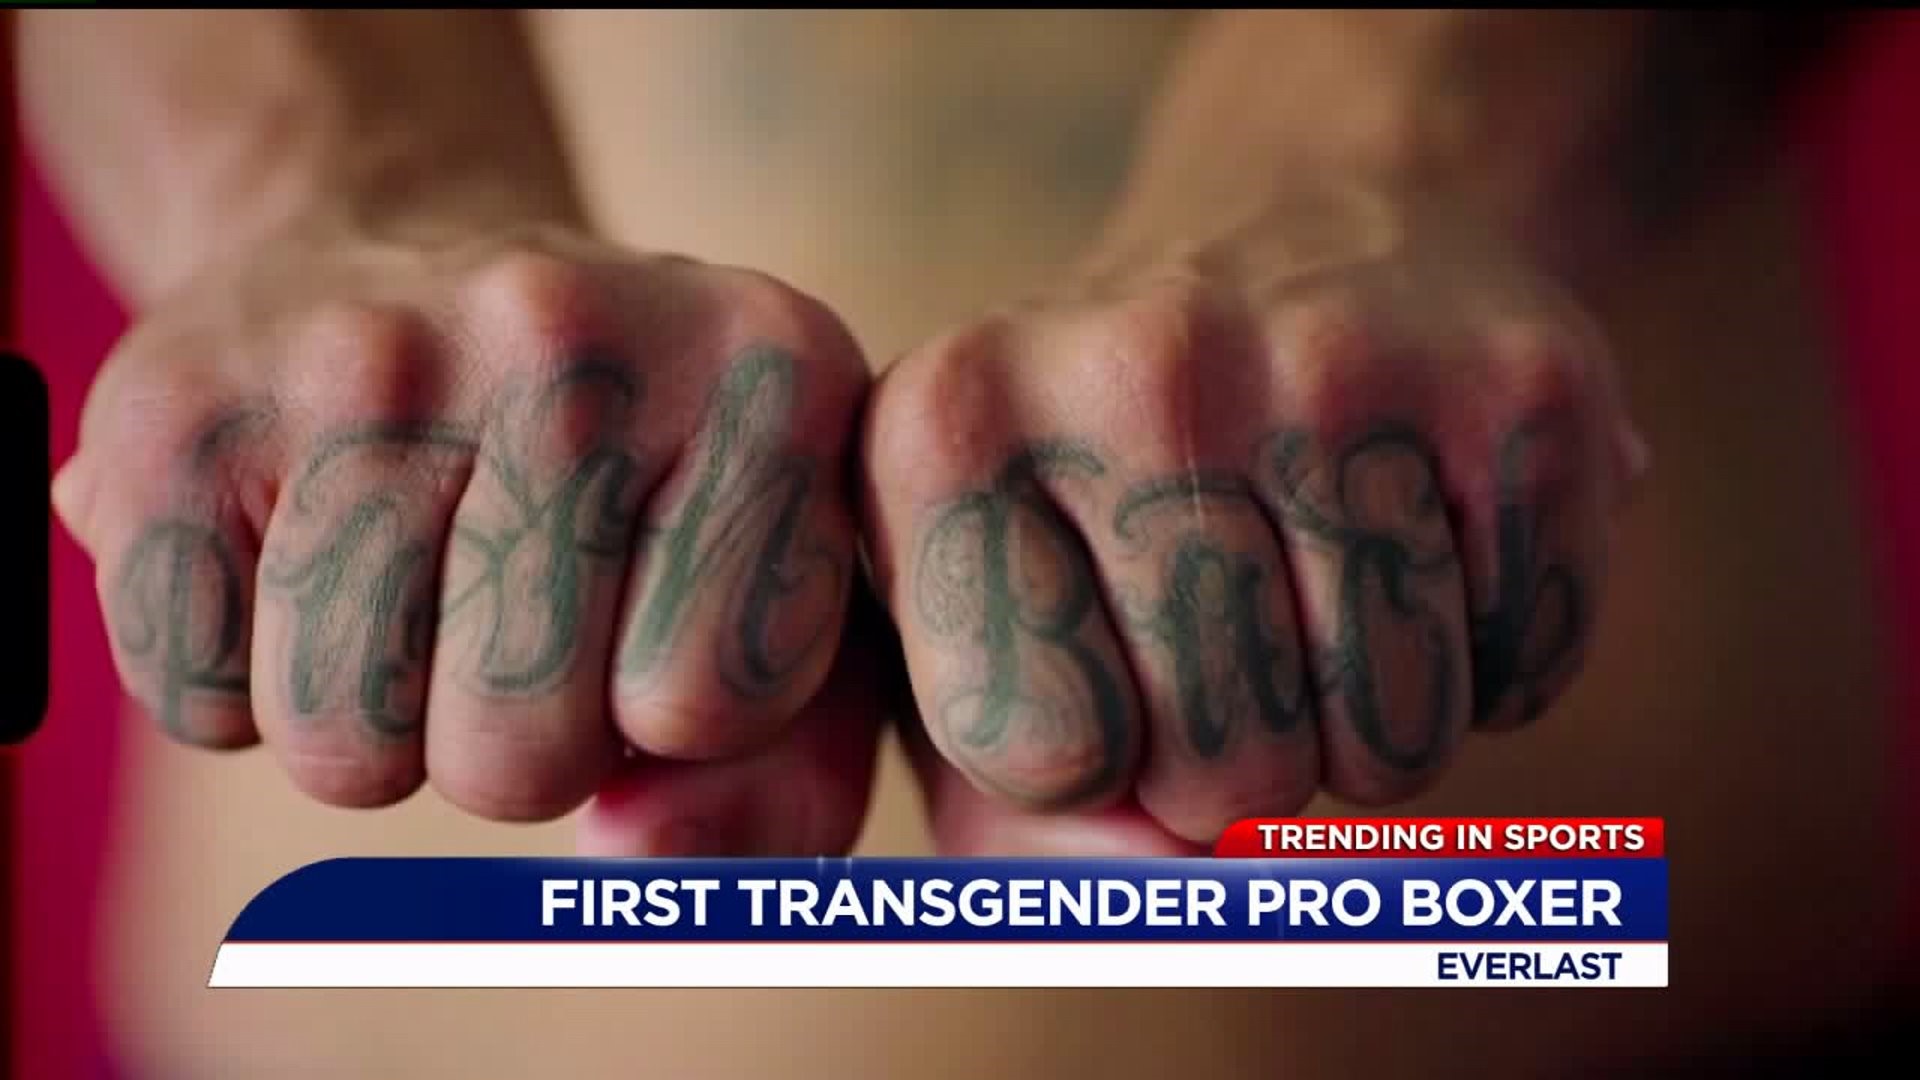 Patricio Manuel is the first professional transgender boxer